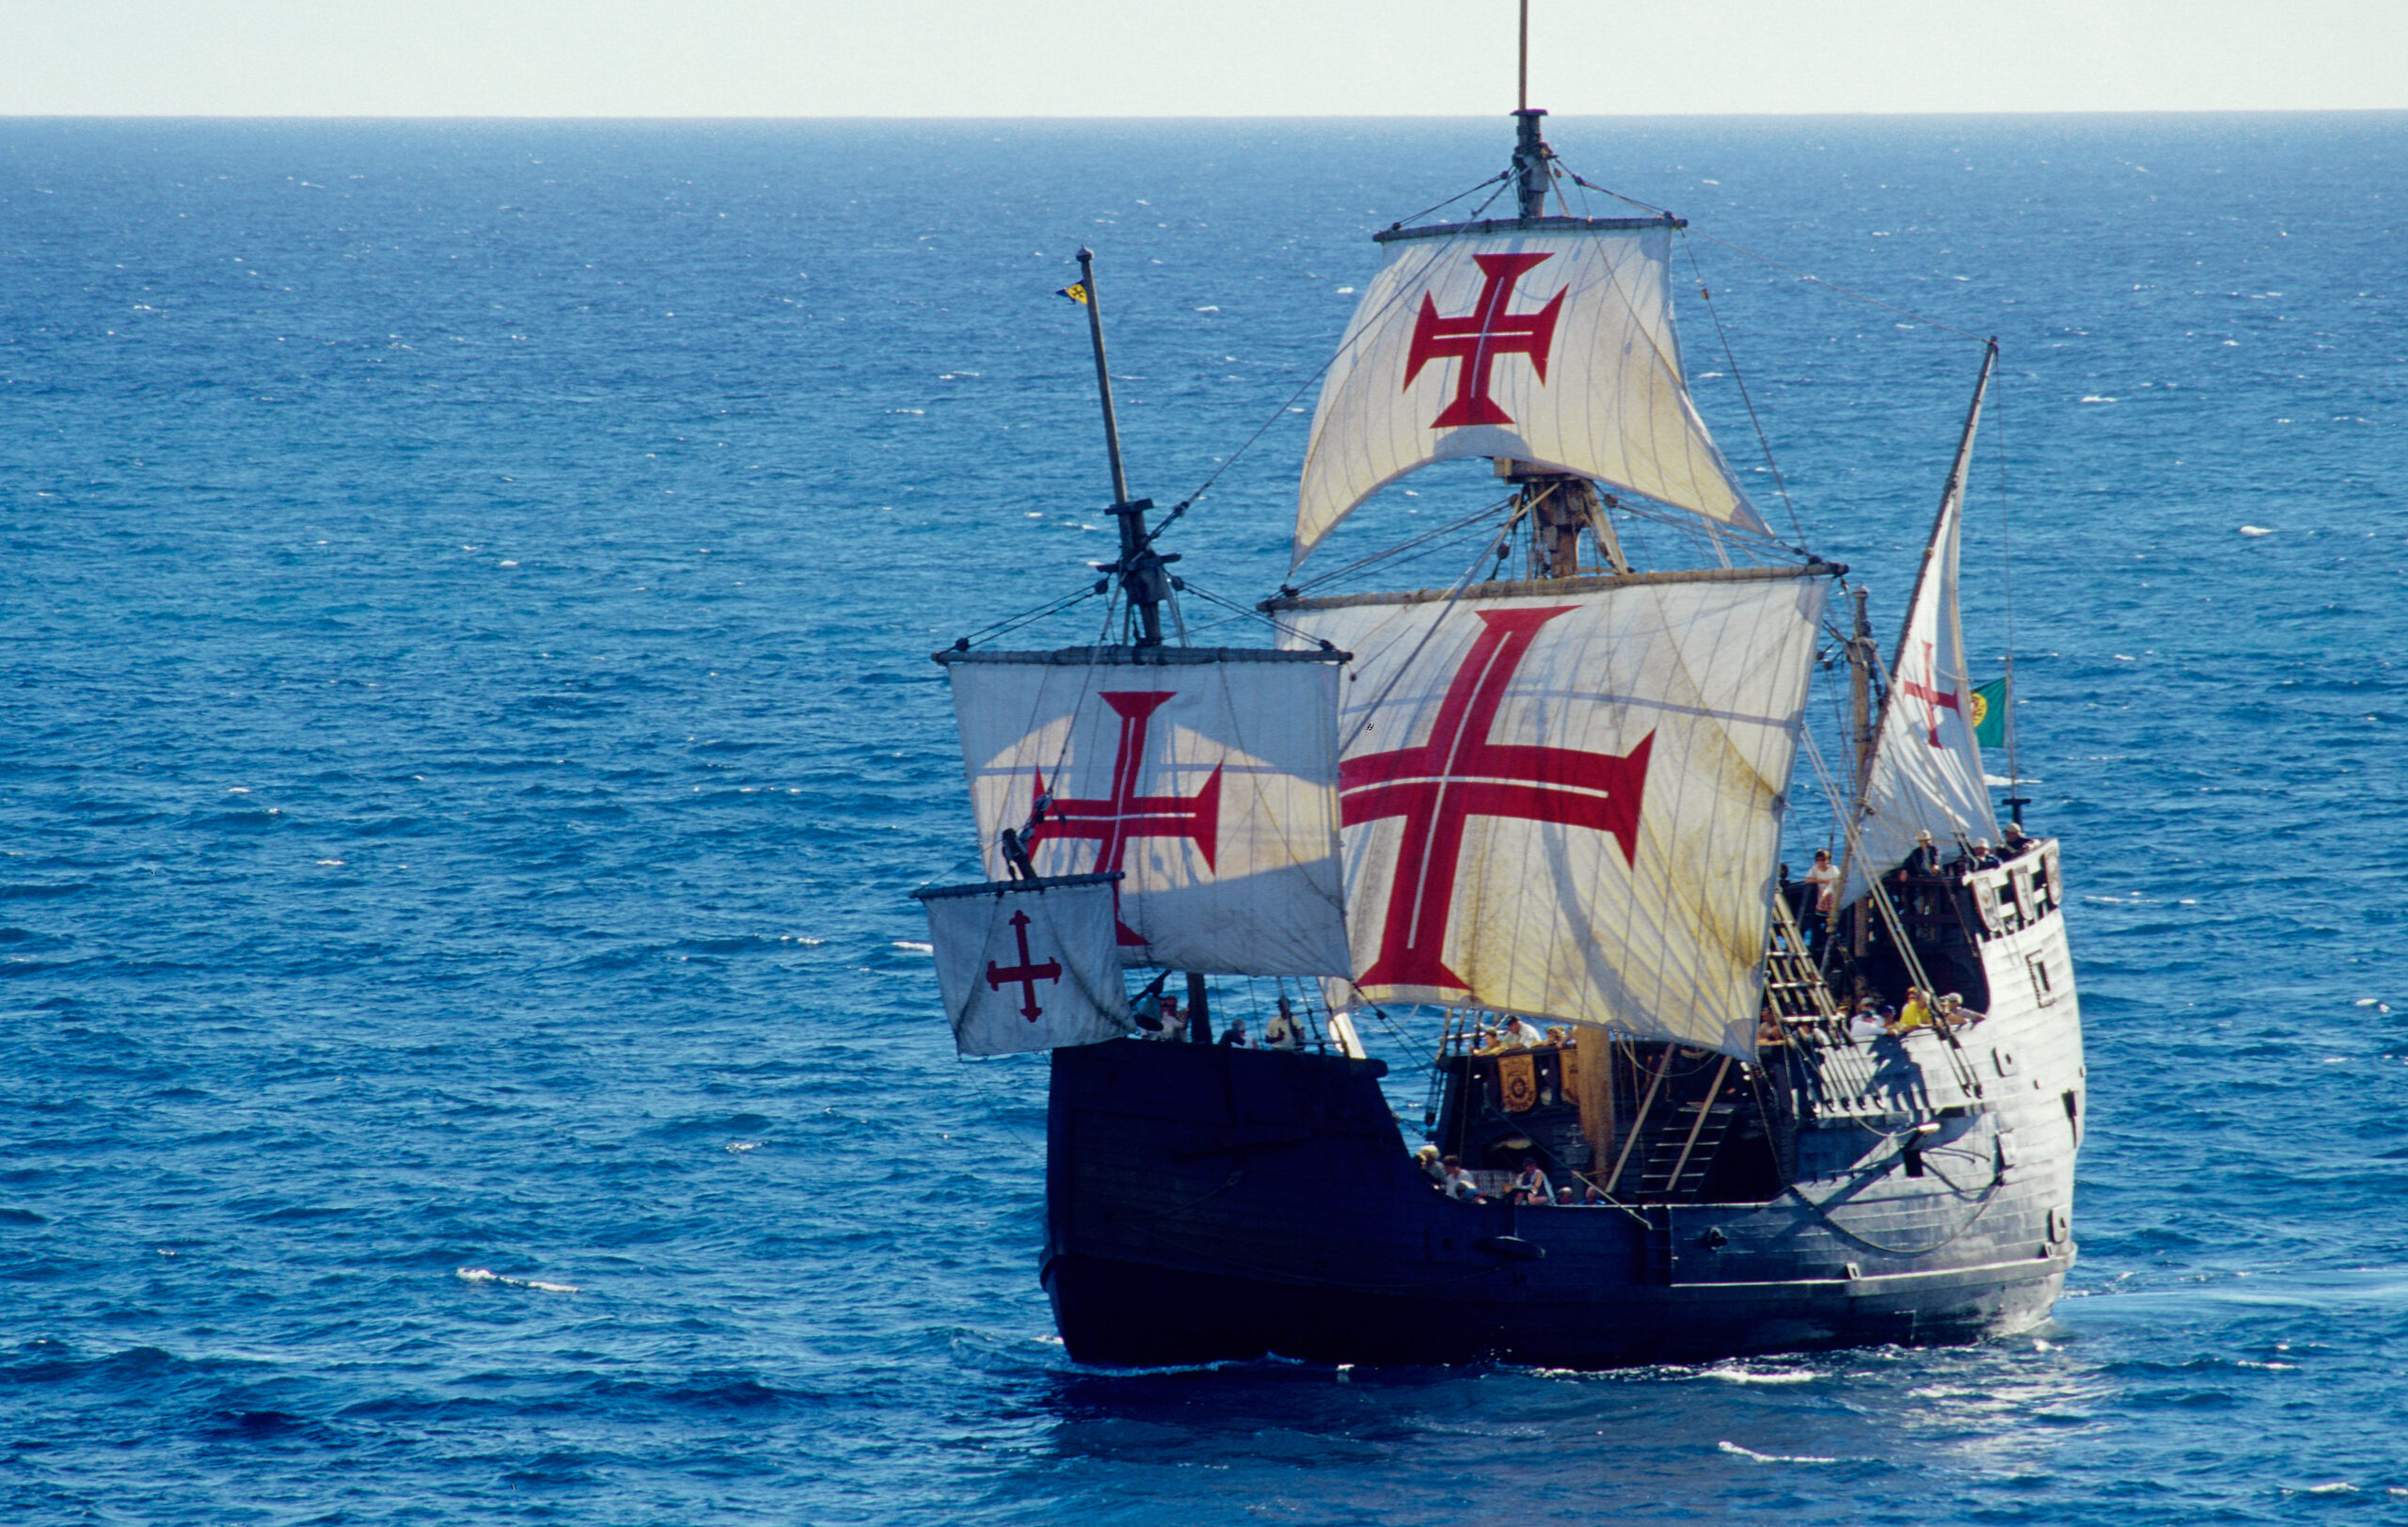 Alamy - A replica of the Santa Maria, the flagship of the Italian explorer's 1492 expedition